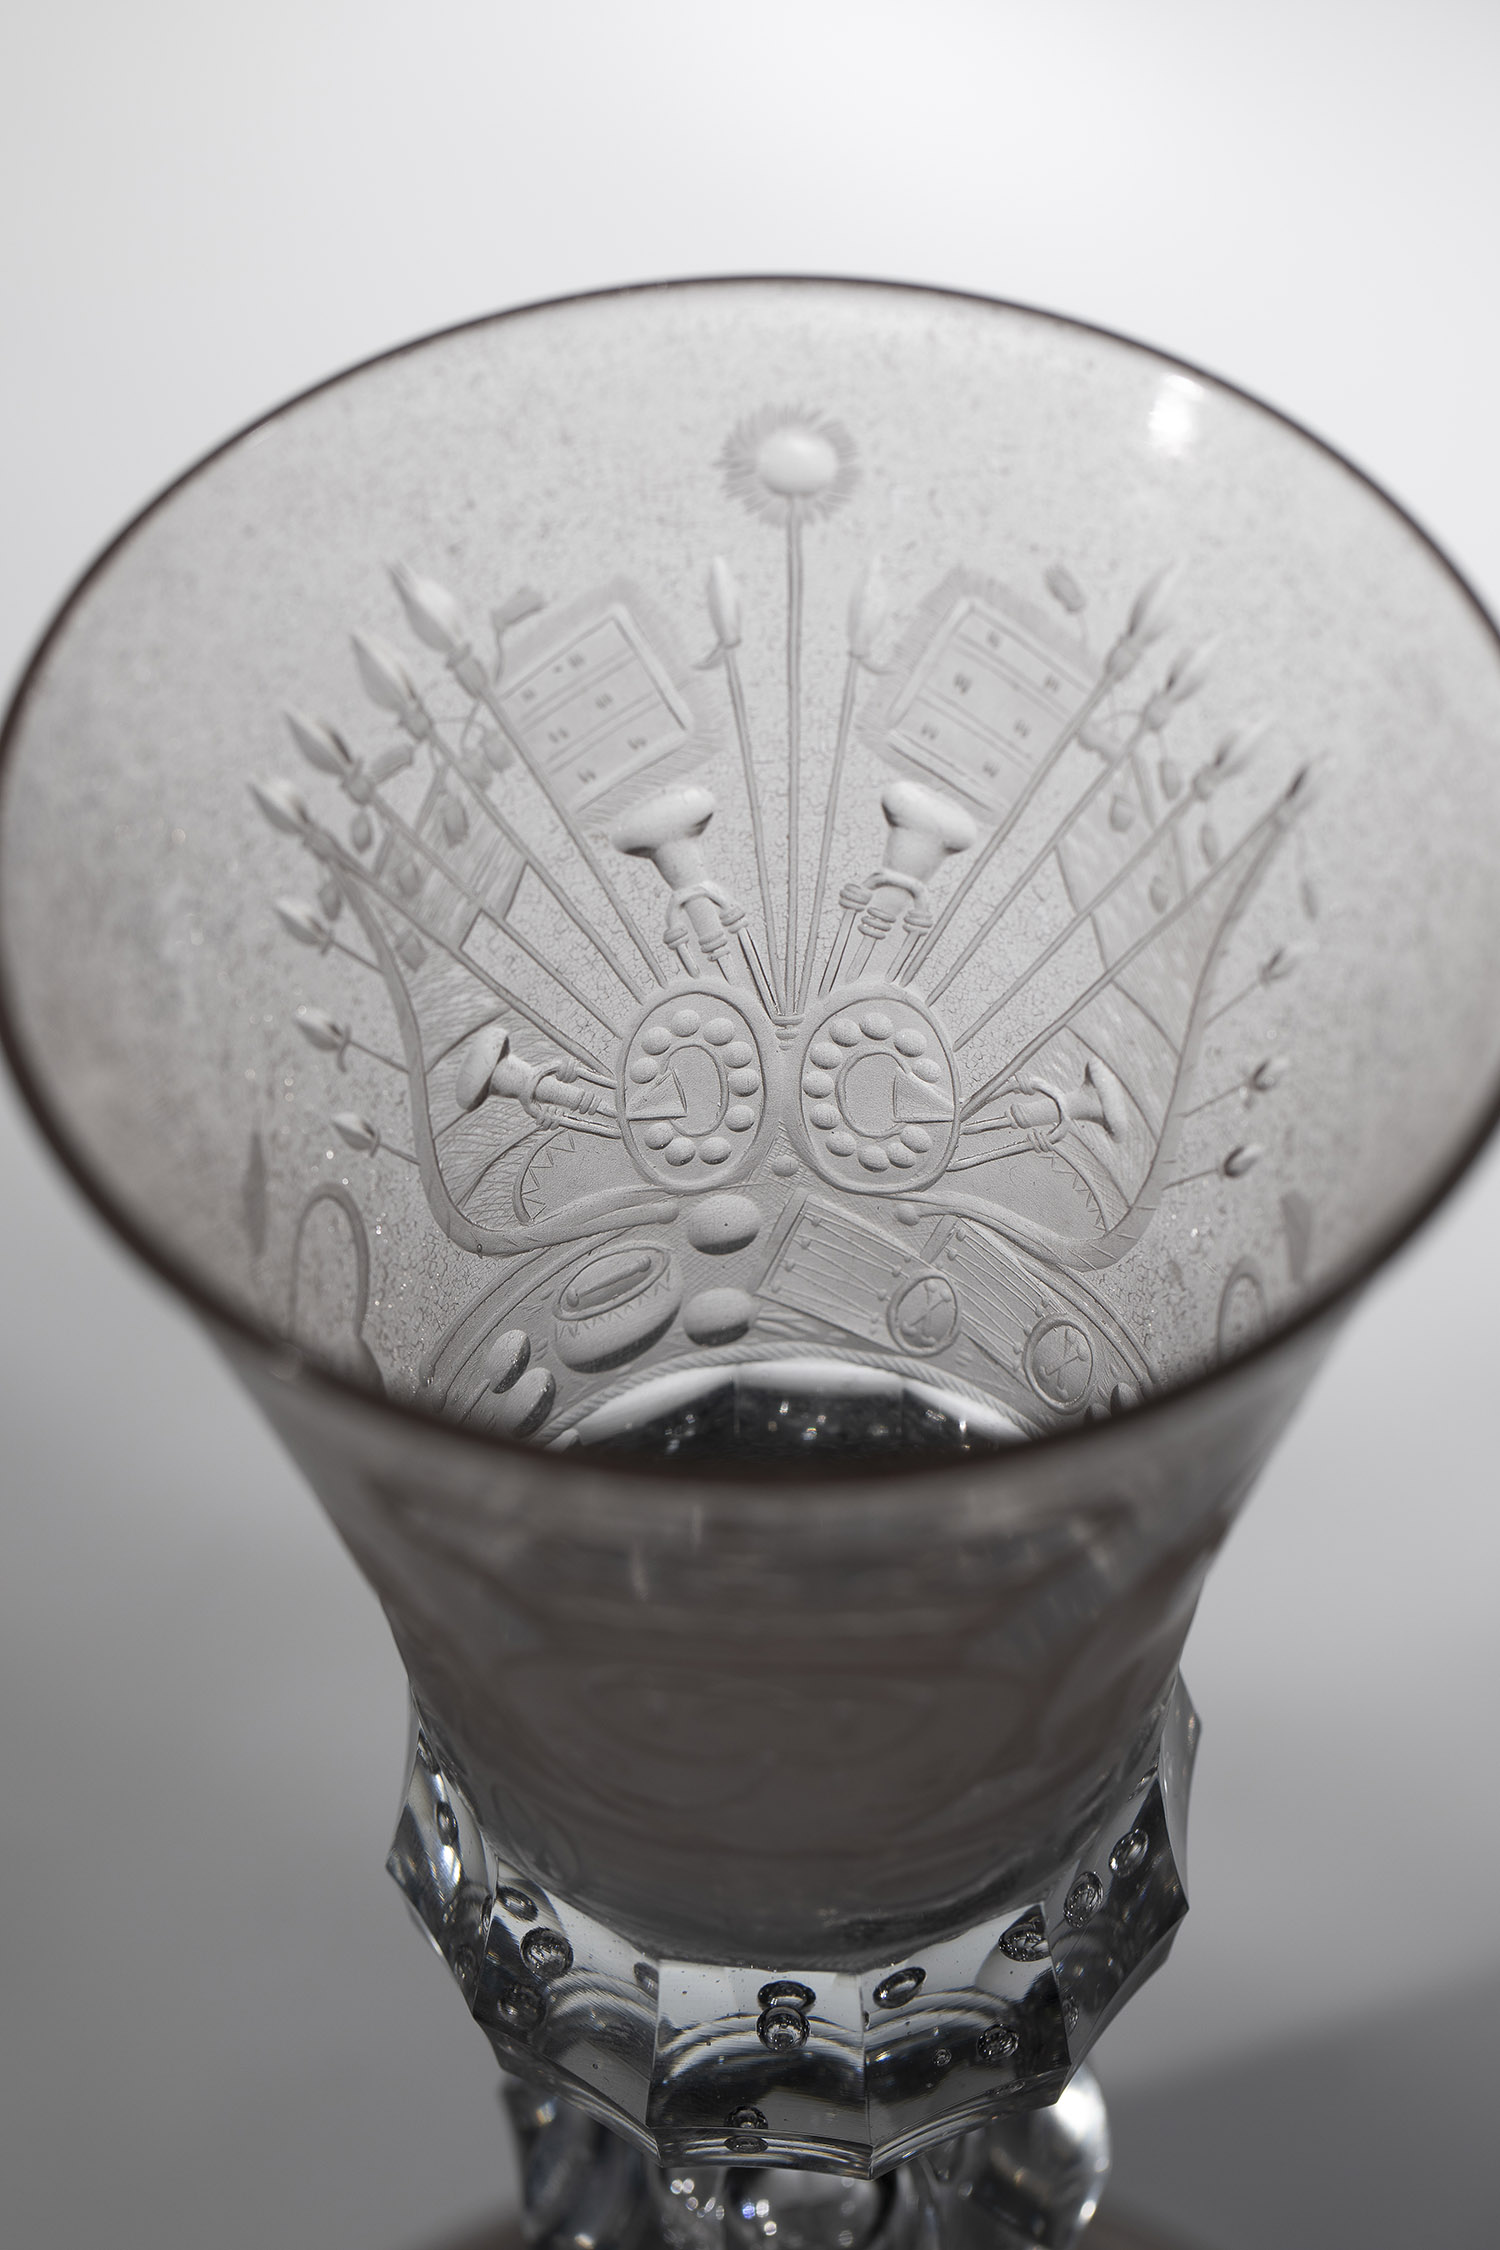 Goblet Georg Rex II Glashuette Emde or Altmuenden, third quarter of the 18th century Grey-tinted - Image 2 of 3